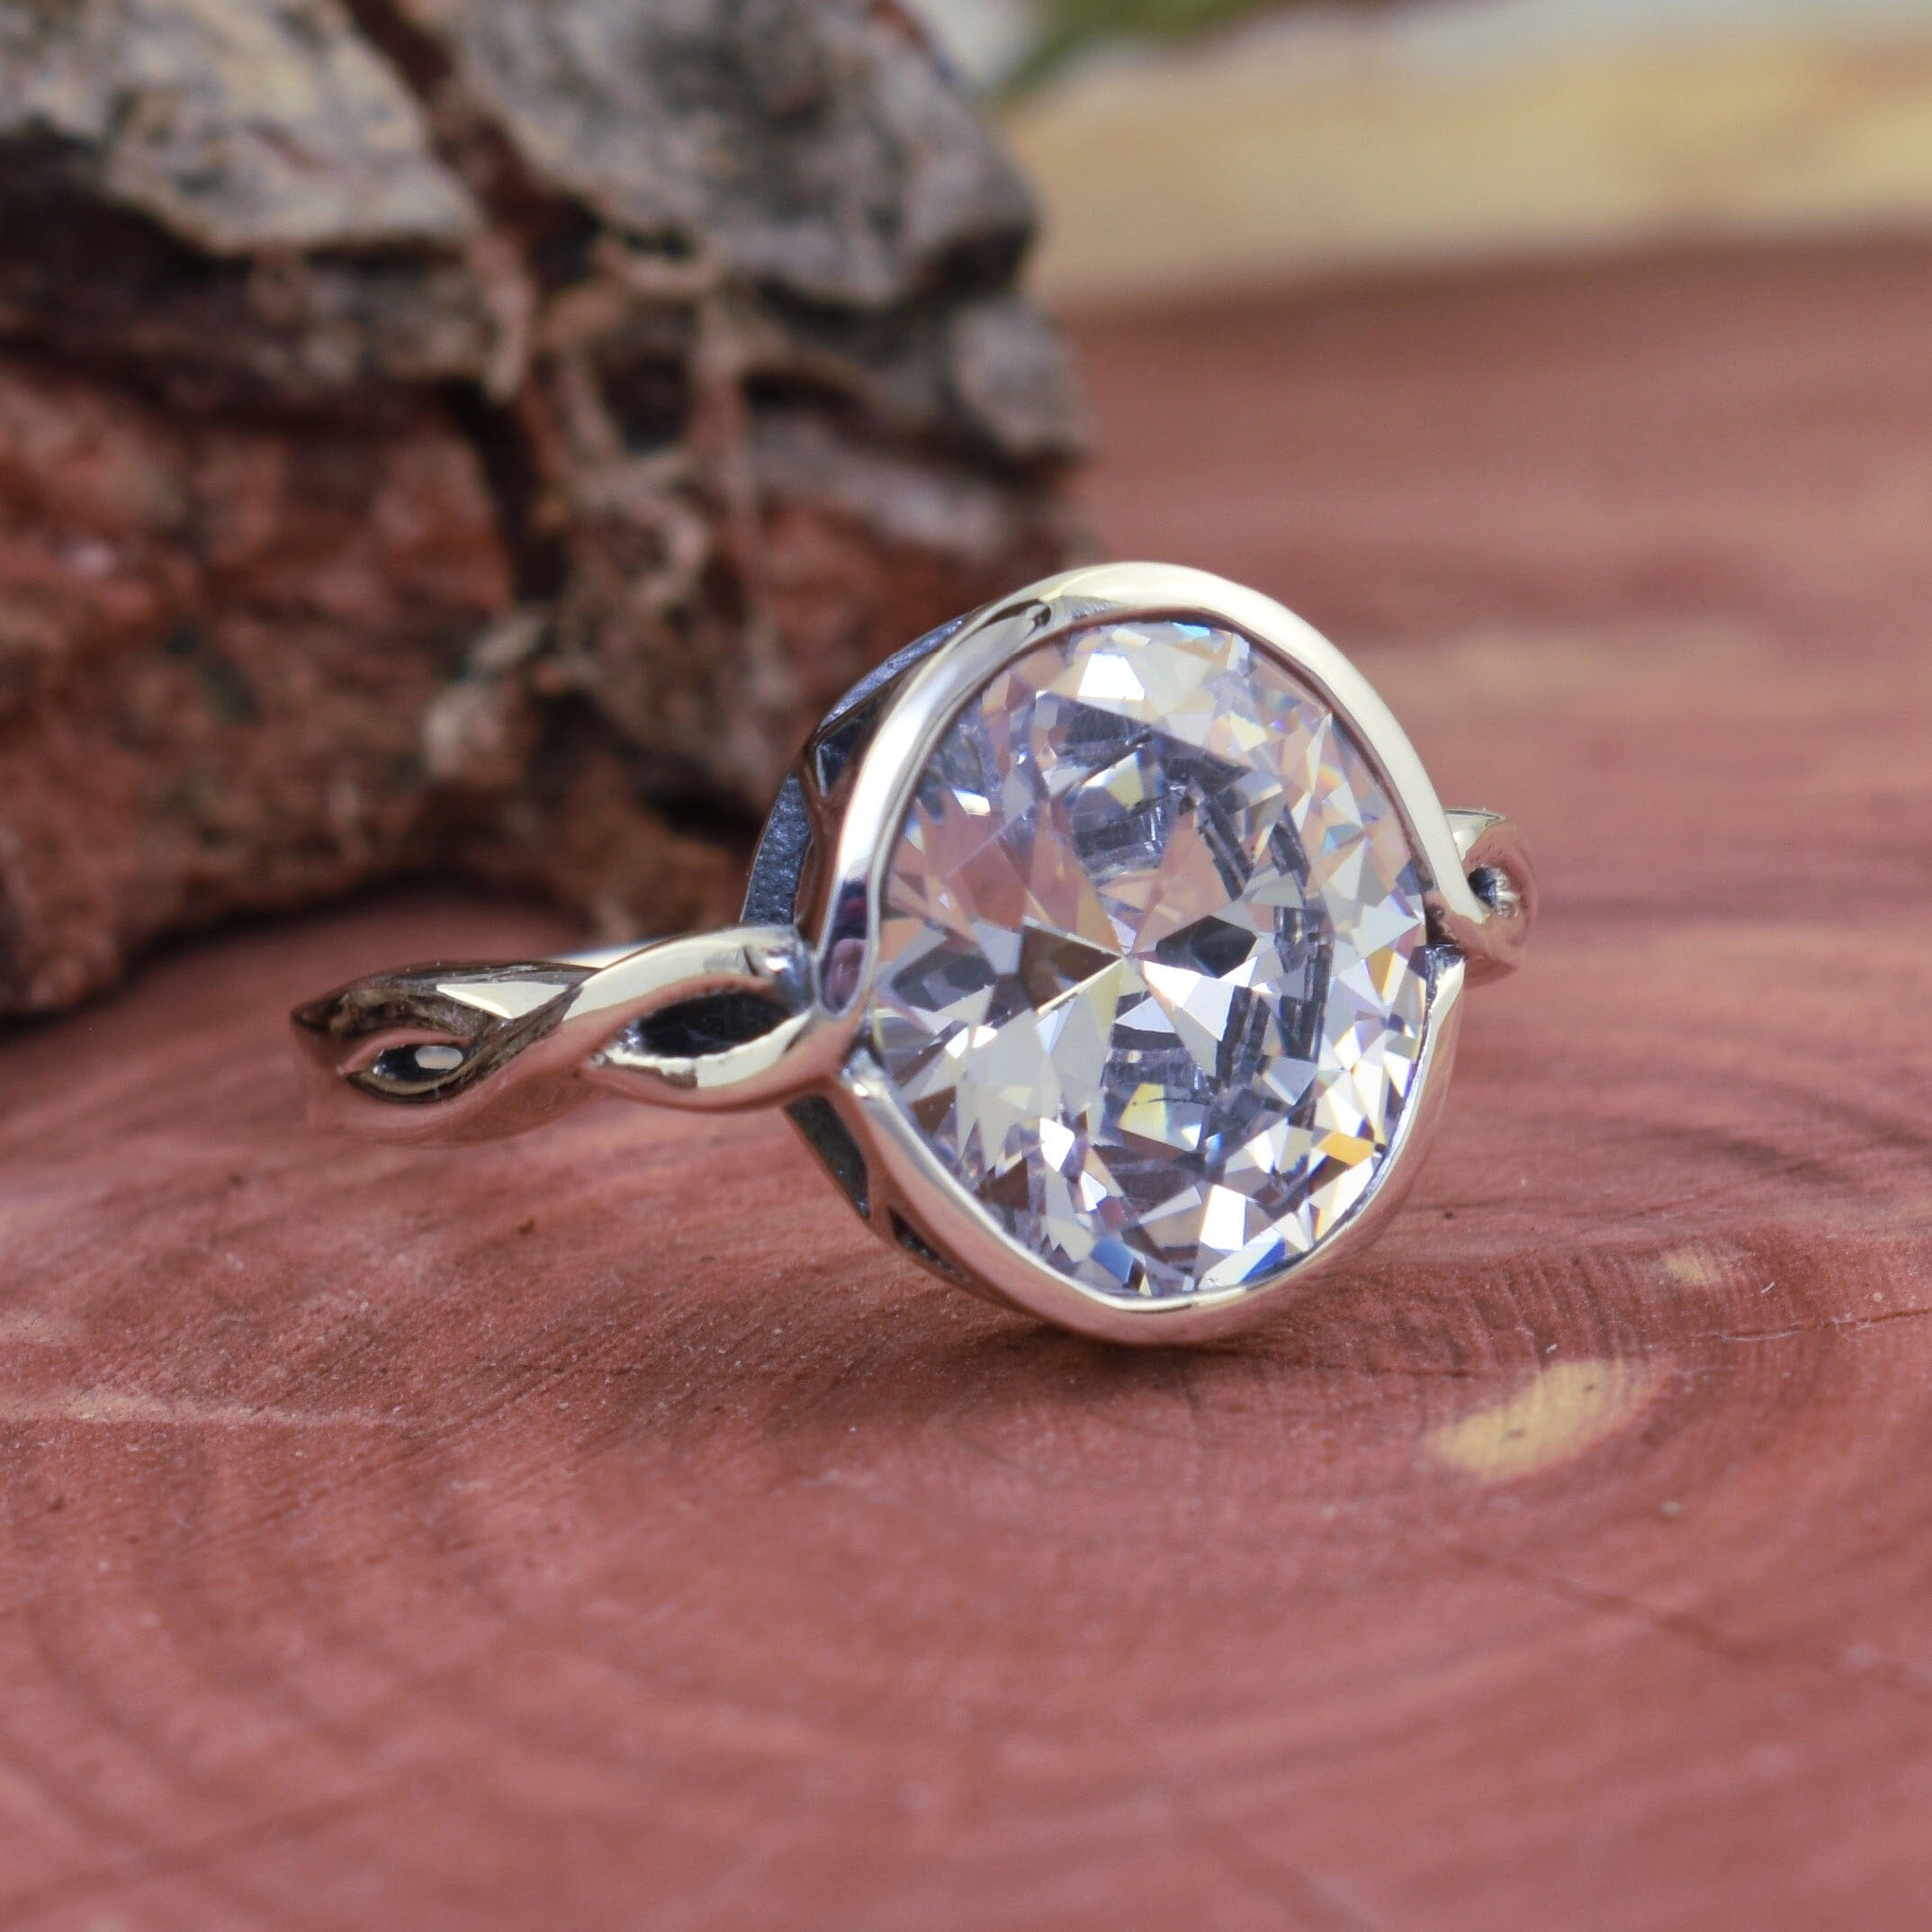 Ornate sterling silver ring with generous sized oval CZ